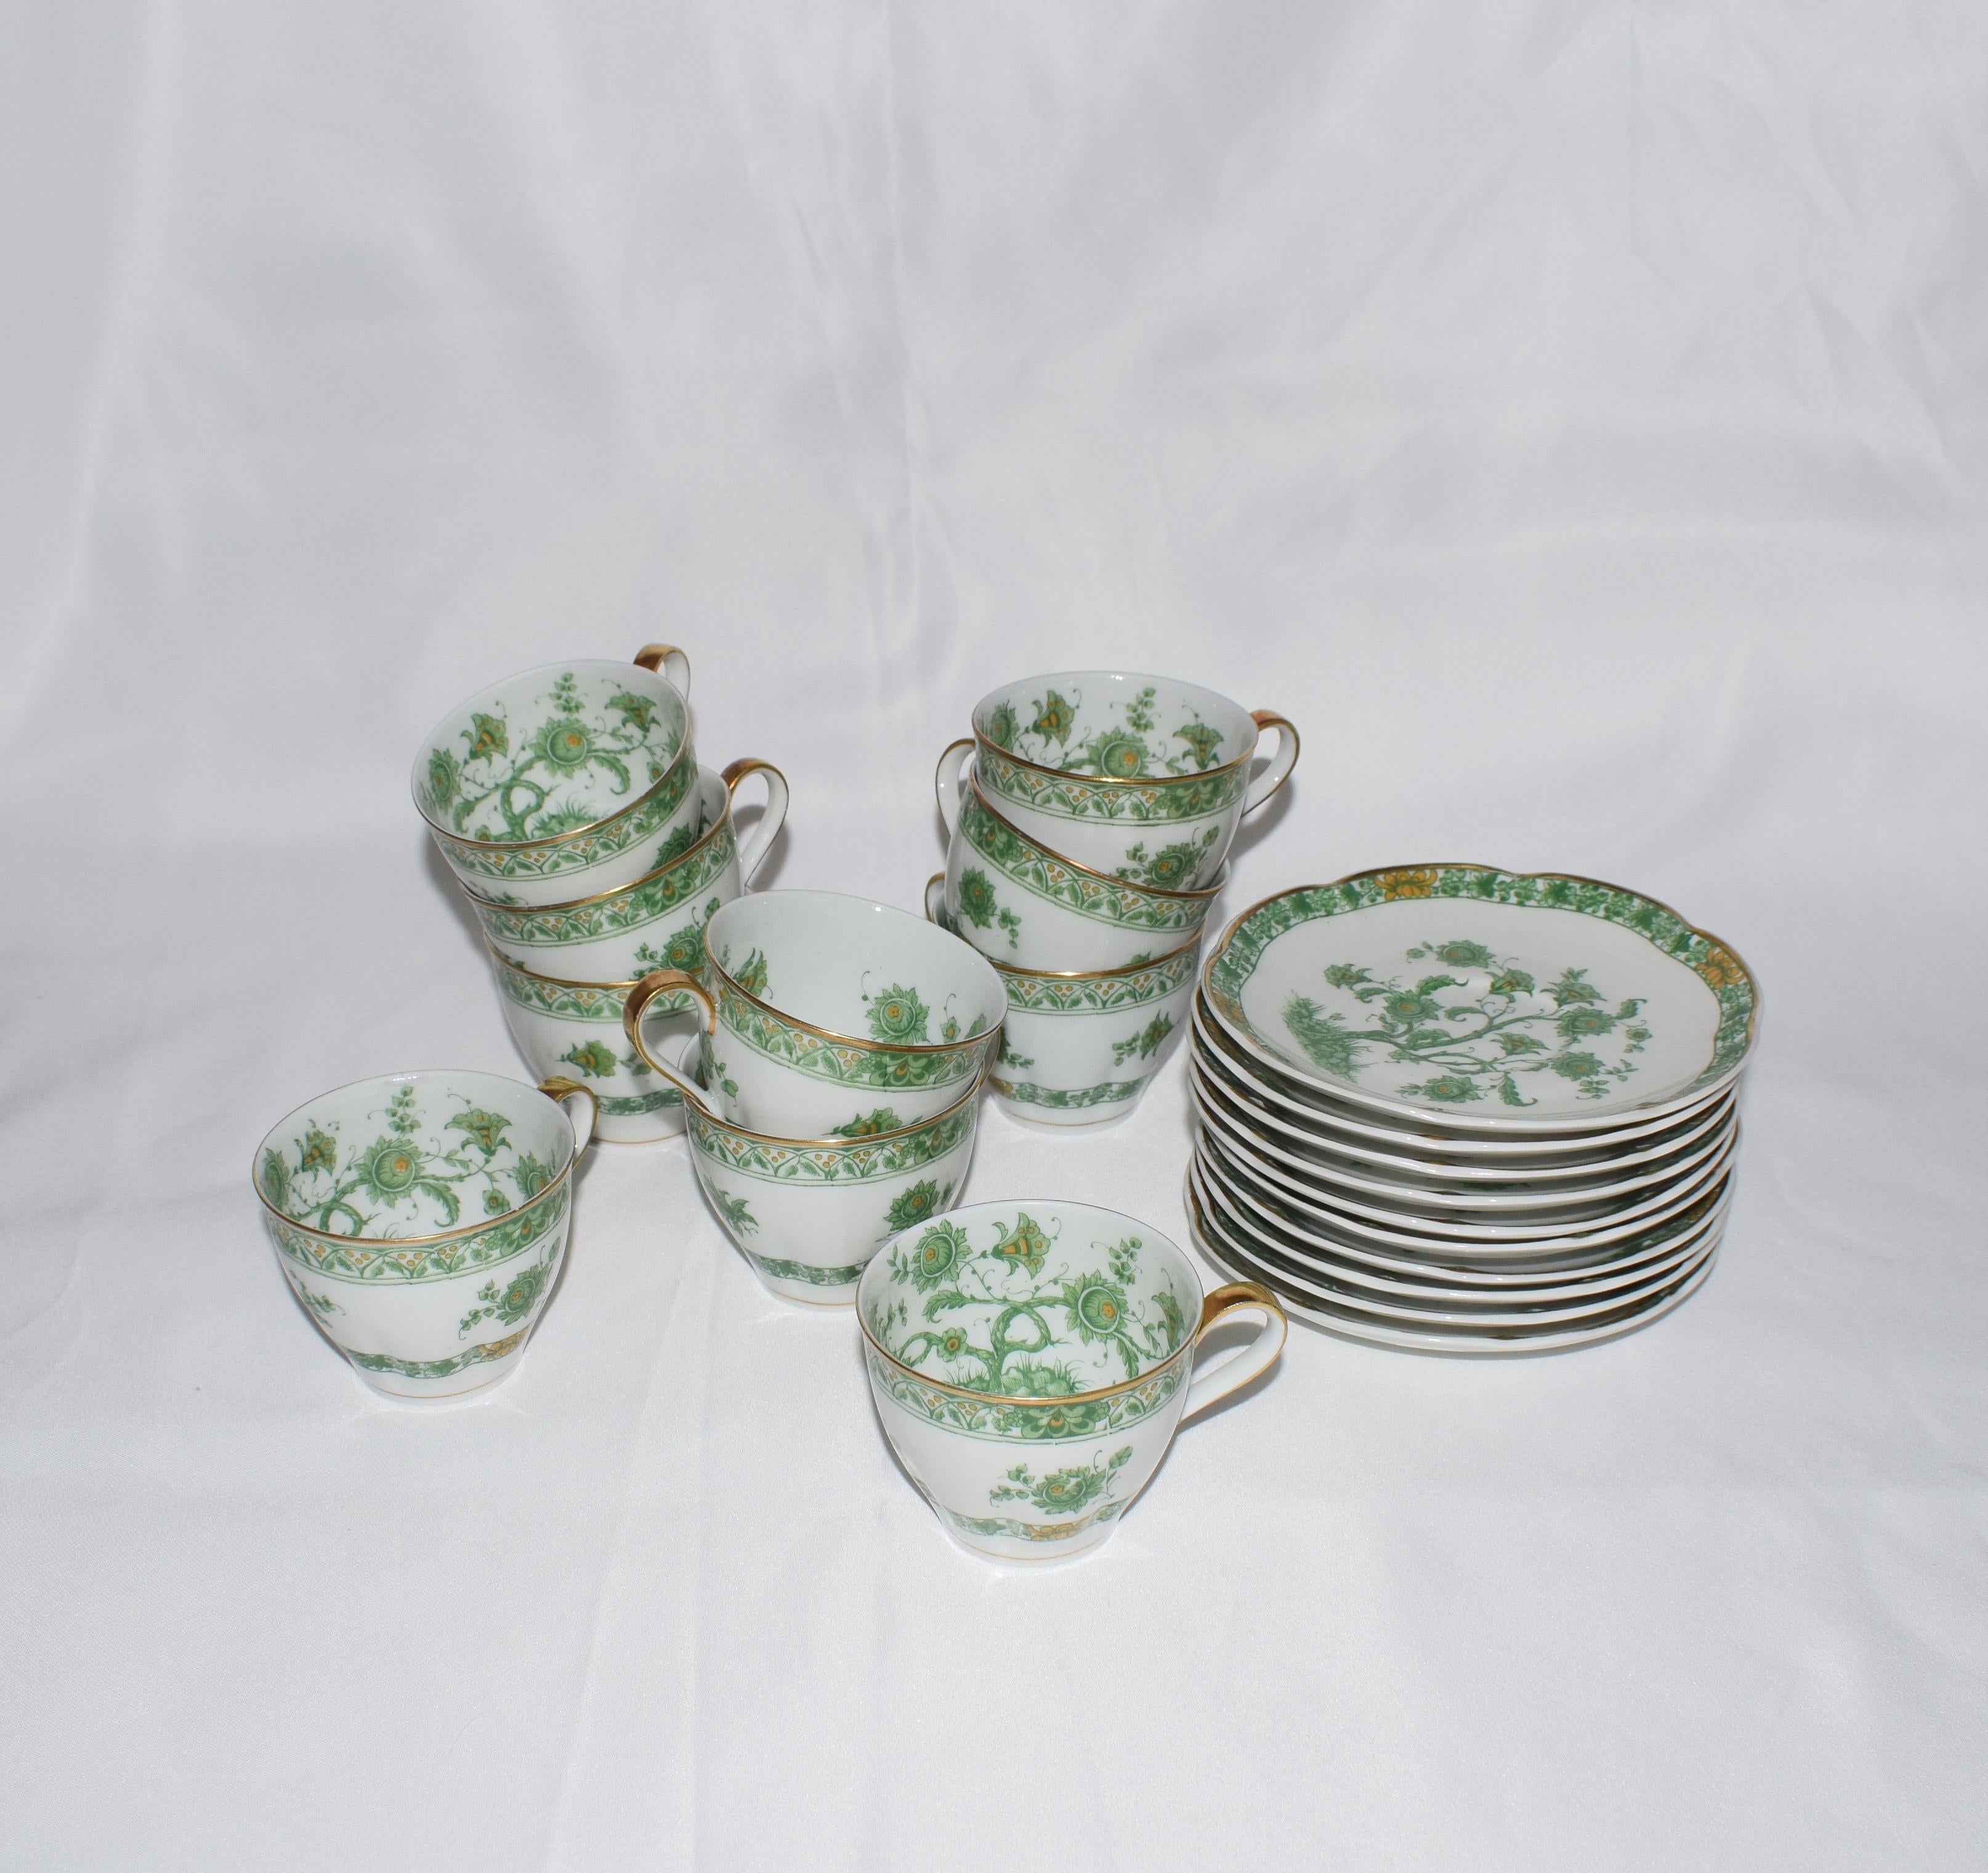 A suite of ten French porcelain teacup and saucer set created by the famous Haviland company of Limoges. Haviland was established when in 1840 a New Yorker called David Haviland, made a trip to France to establish an alliance with a manufacturer. He